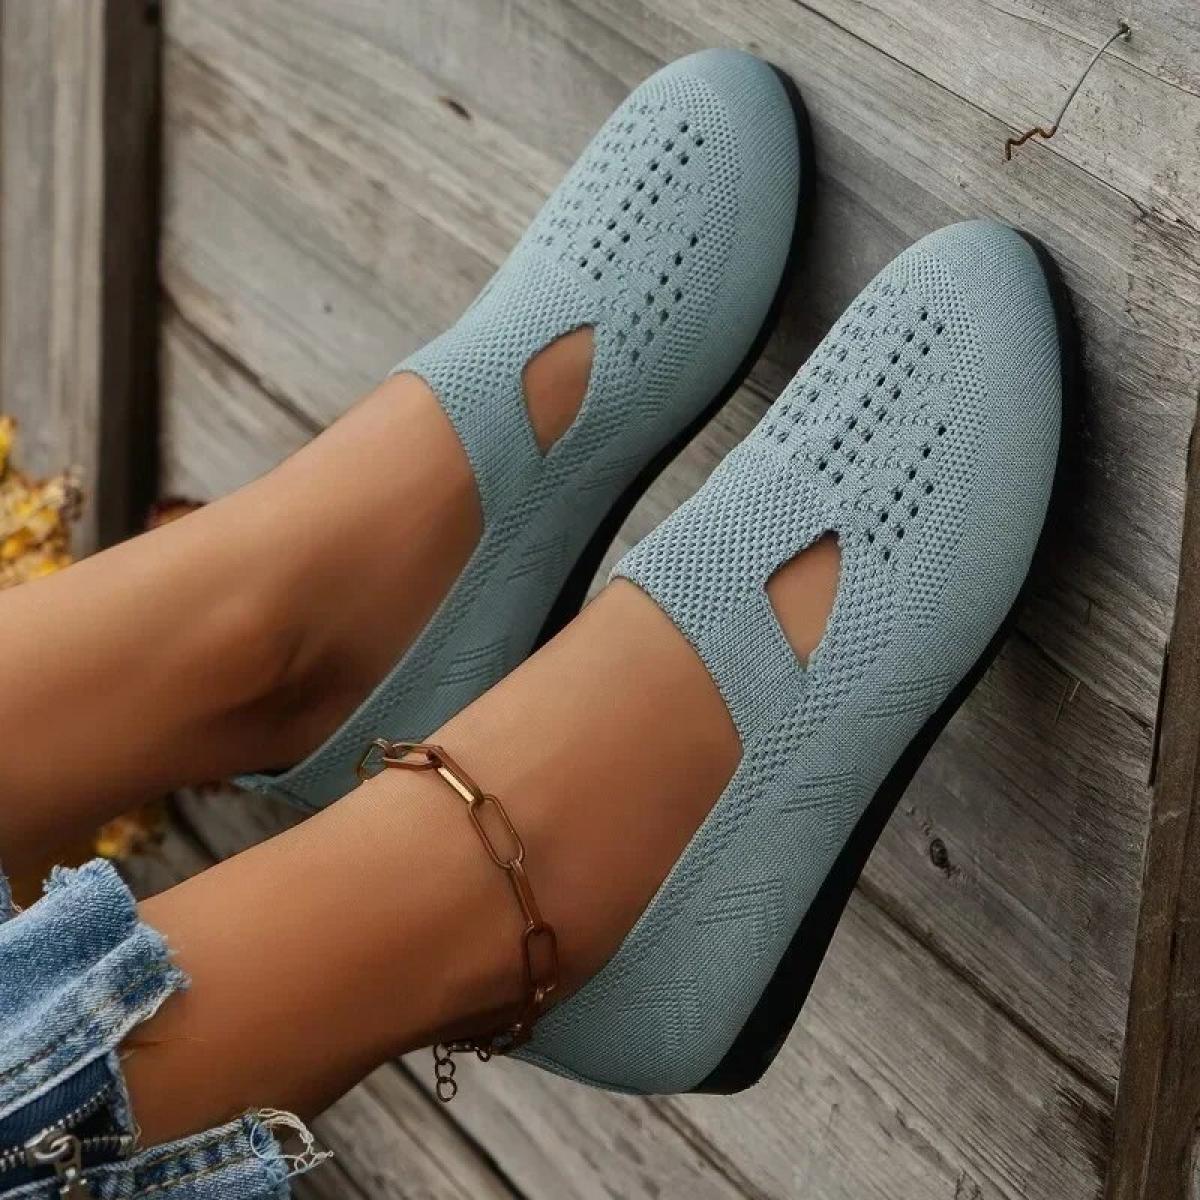 Women Flats Shoes New Spring Summer Mesh Sneakers Fashion Platform Breathable Casual Ladies Walking Loafer Shoes